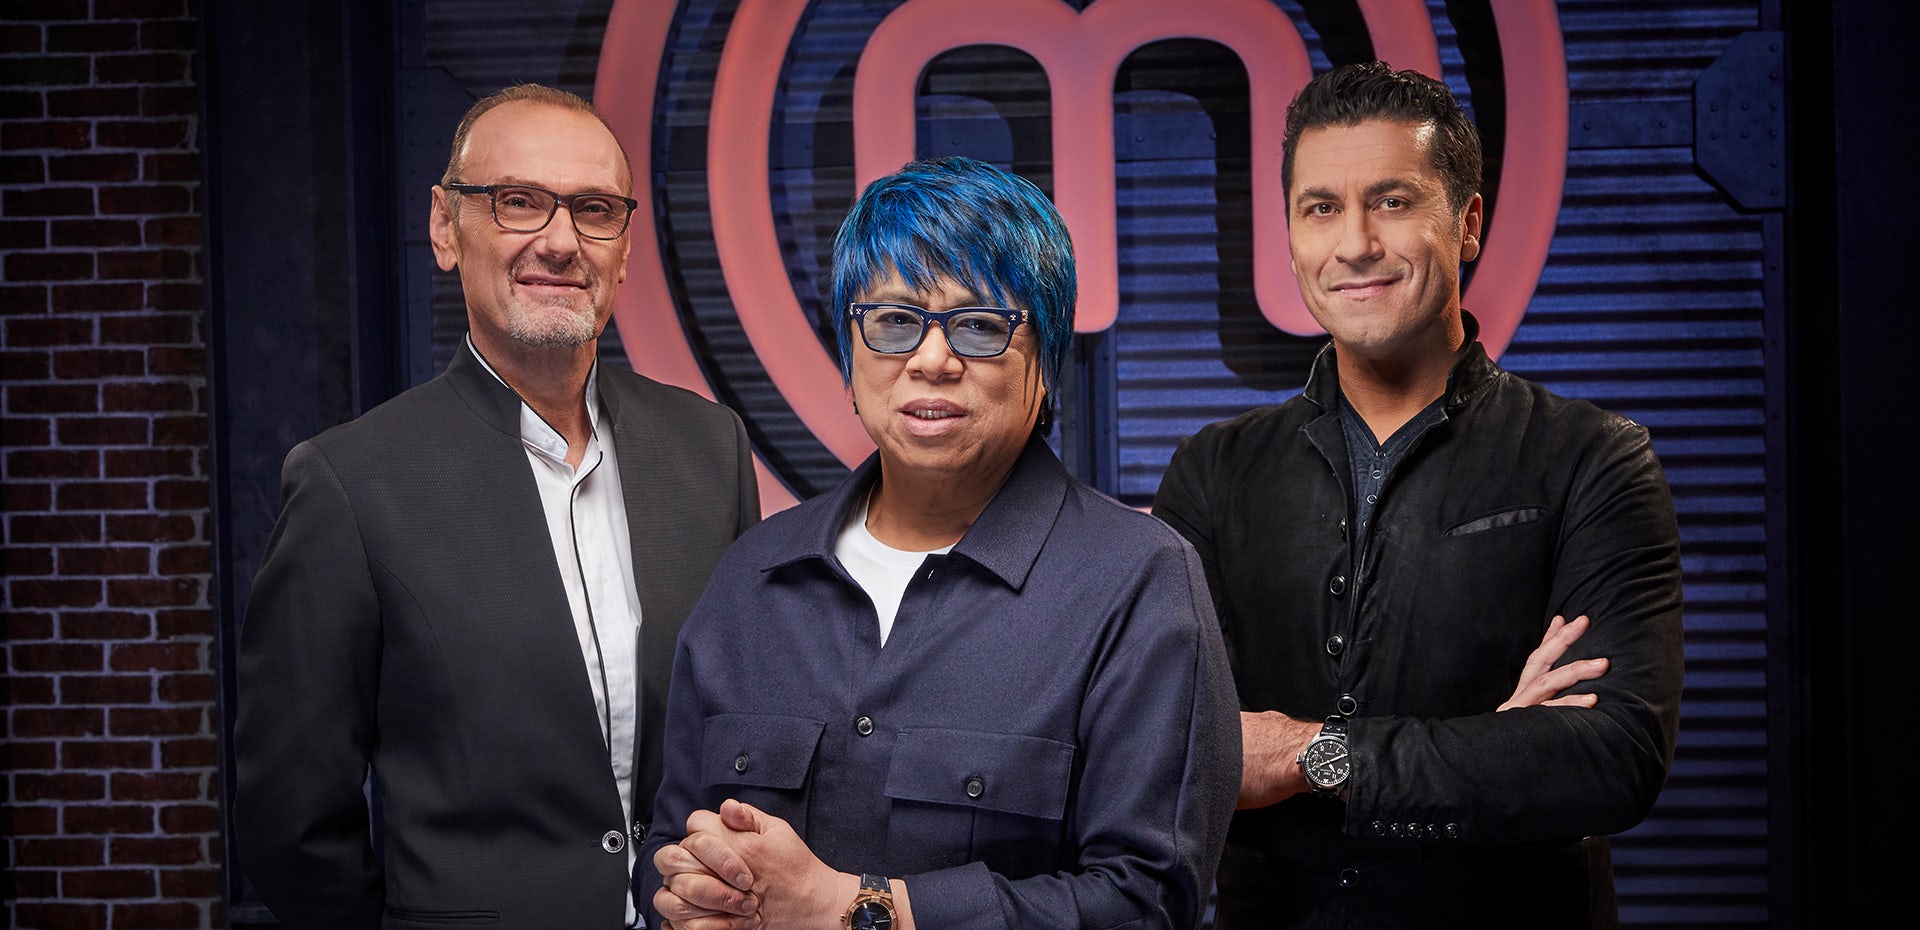 Canada’s Favourite Culinary Competition MASTERCHEF CANADA Returns With